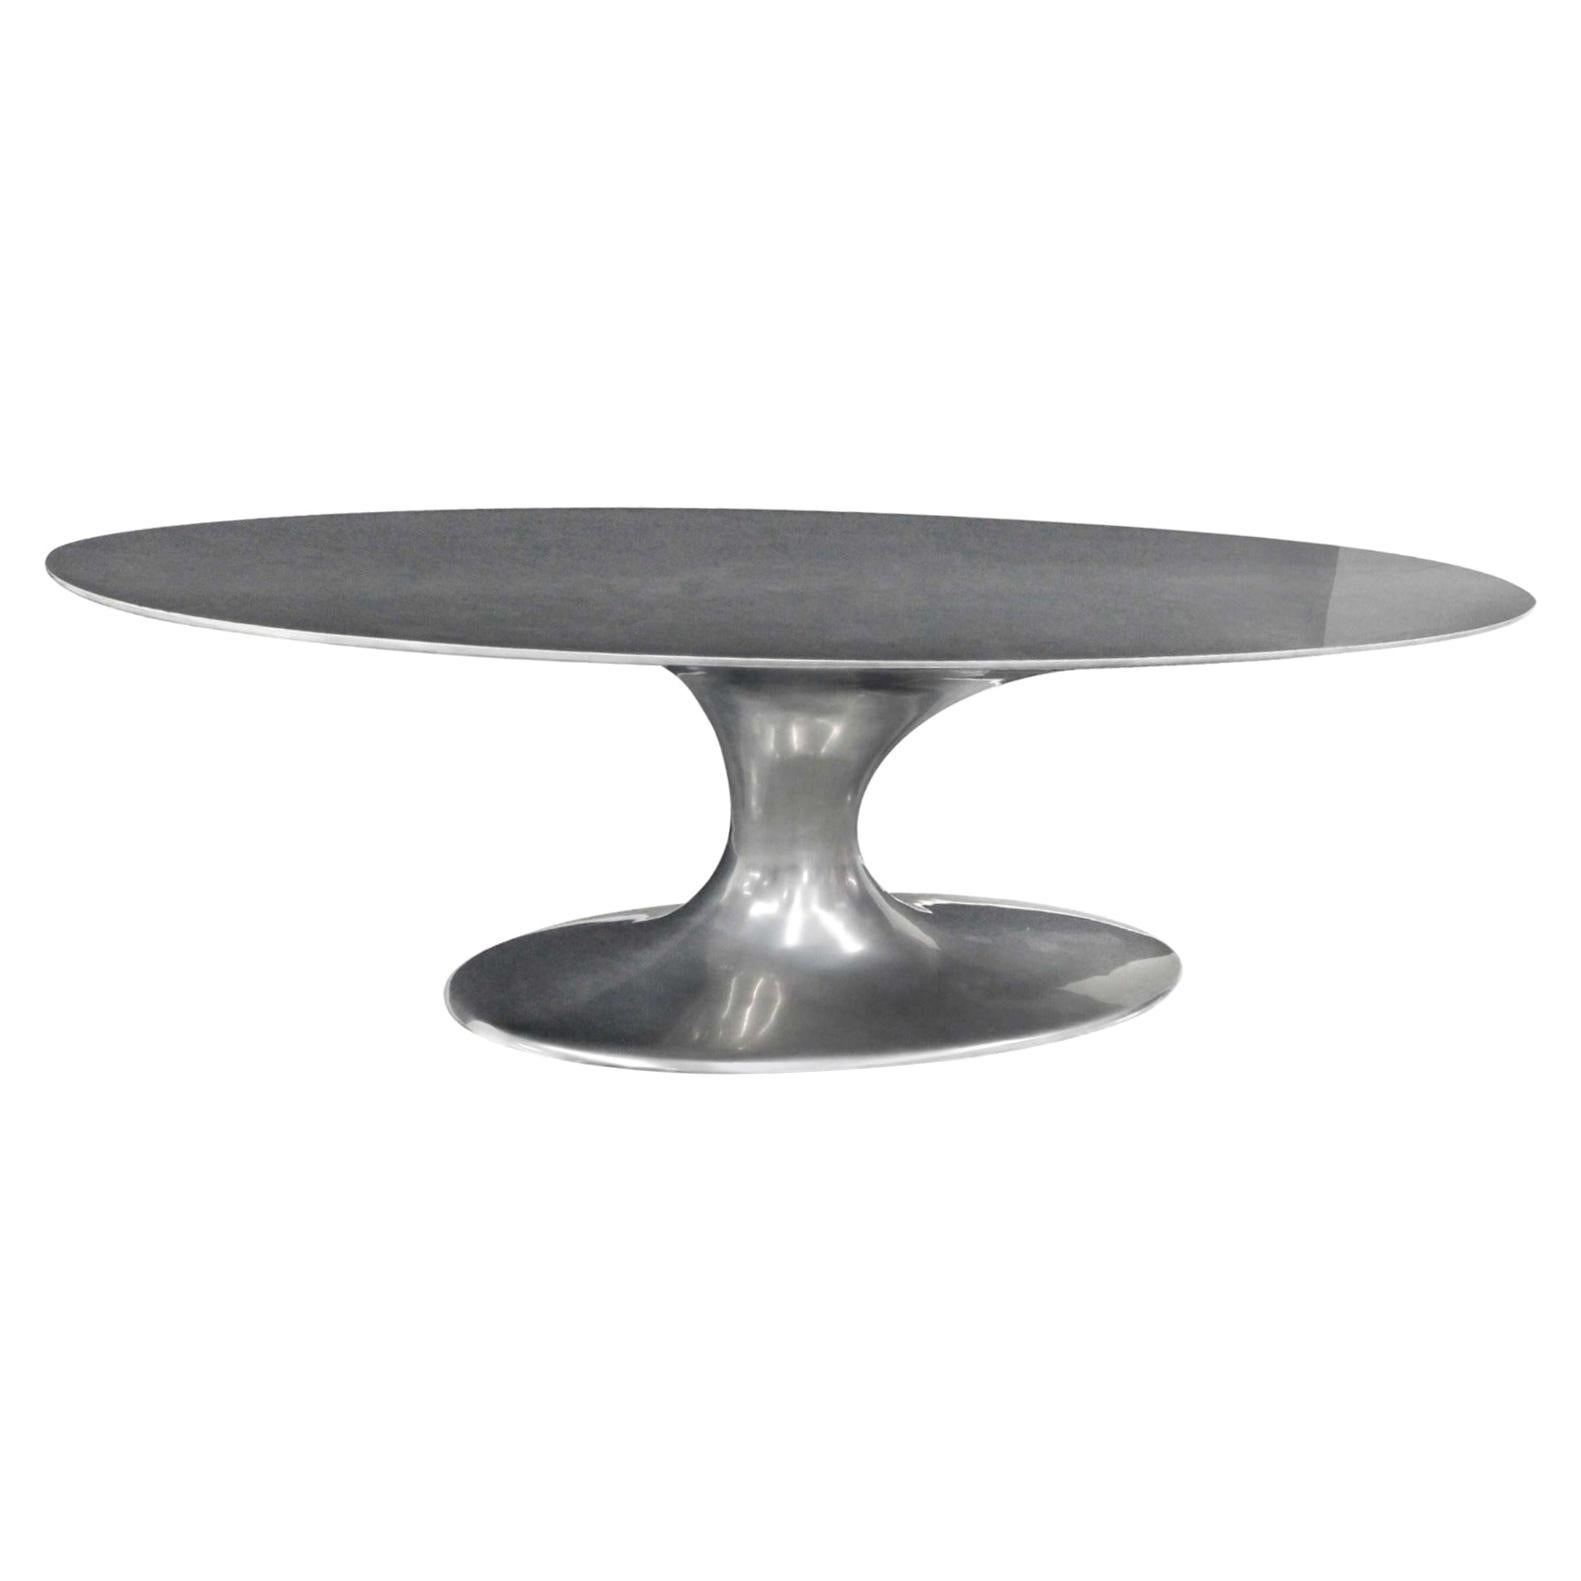 New Design Chrome Dining Table in Wood and Resin